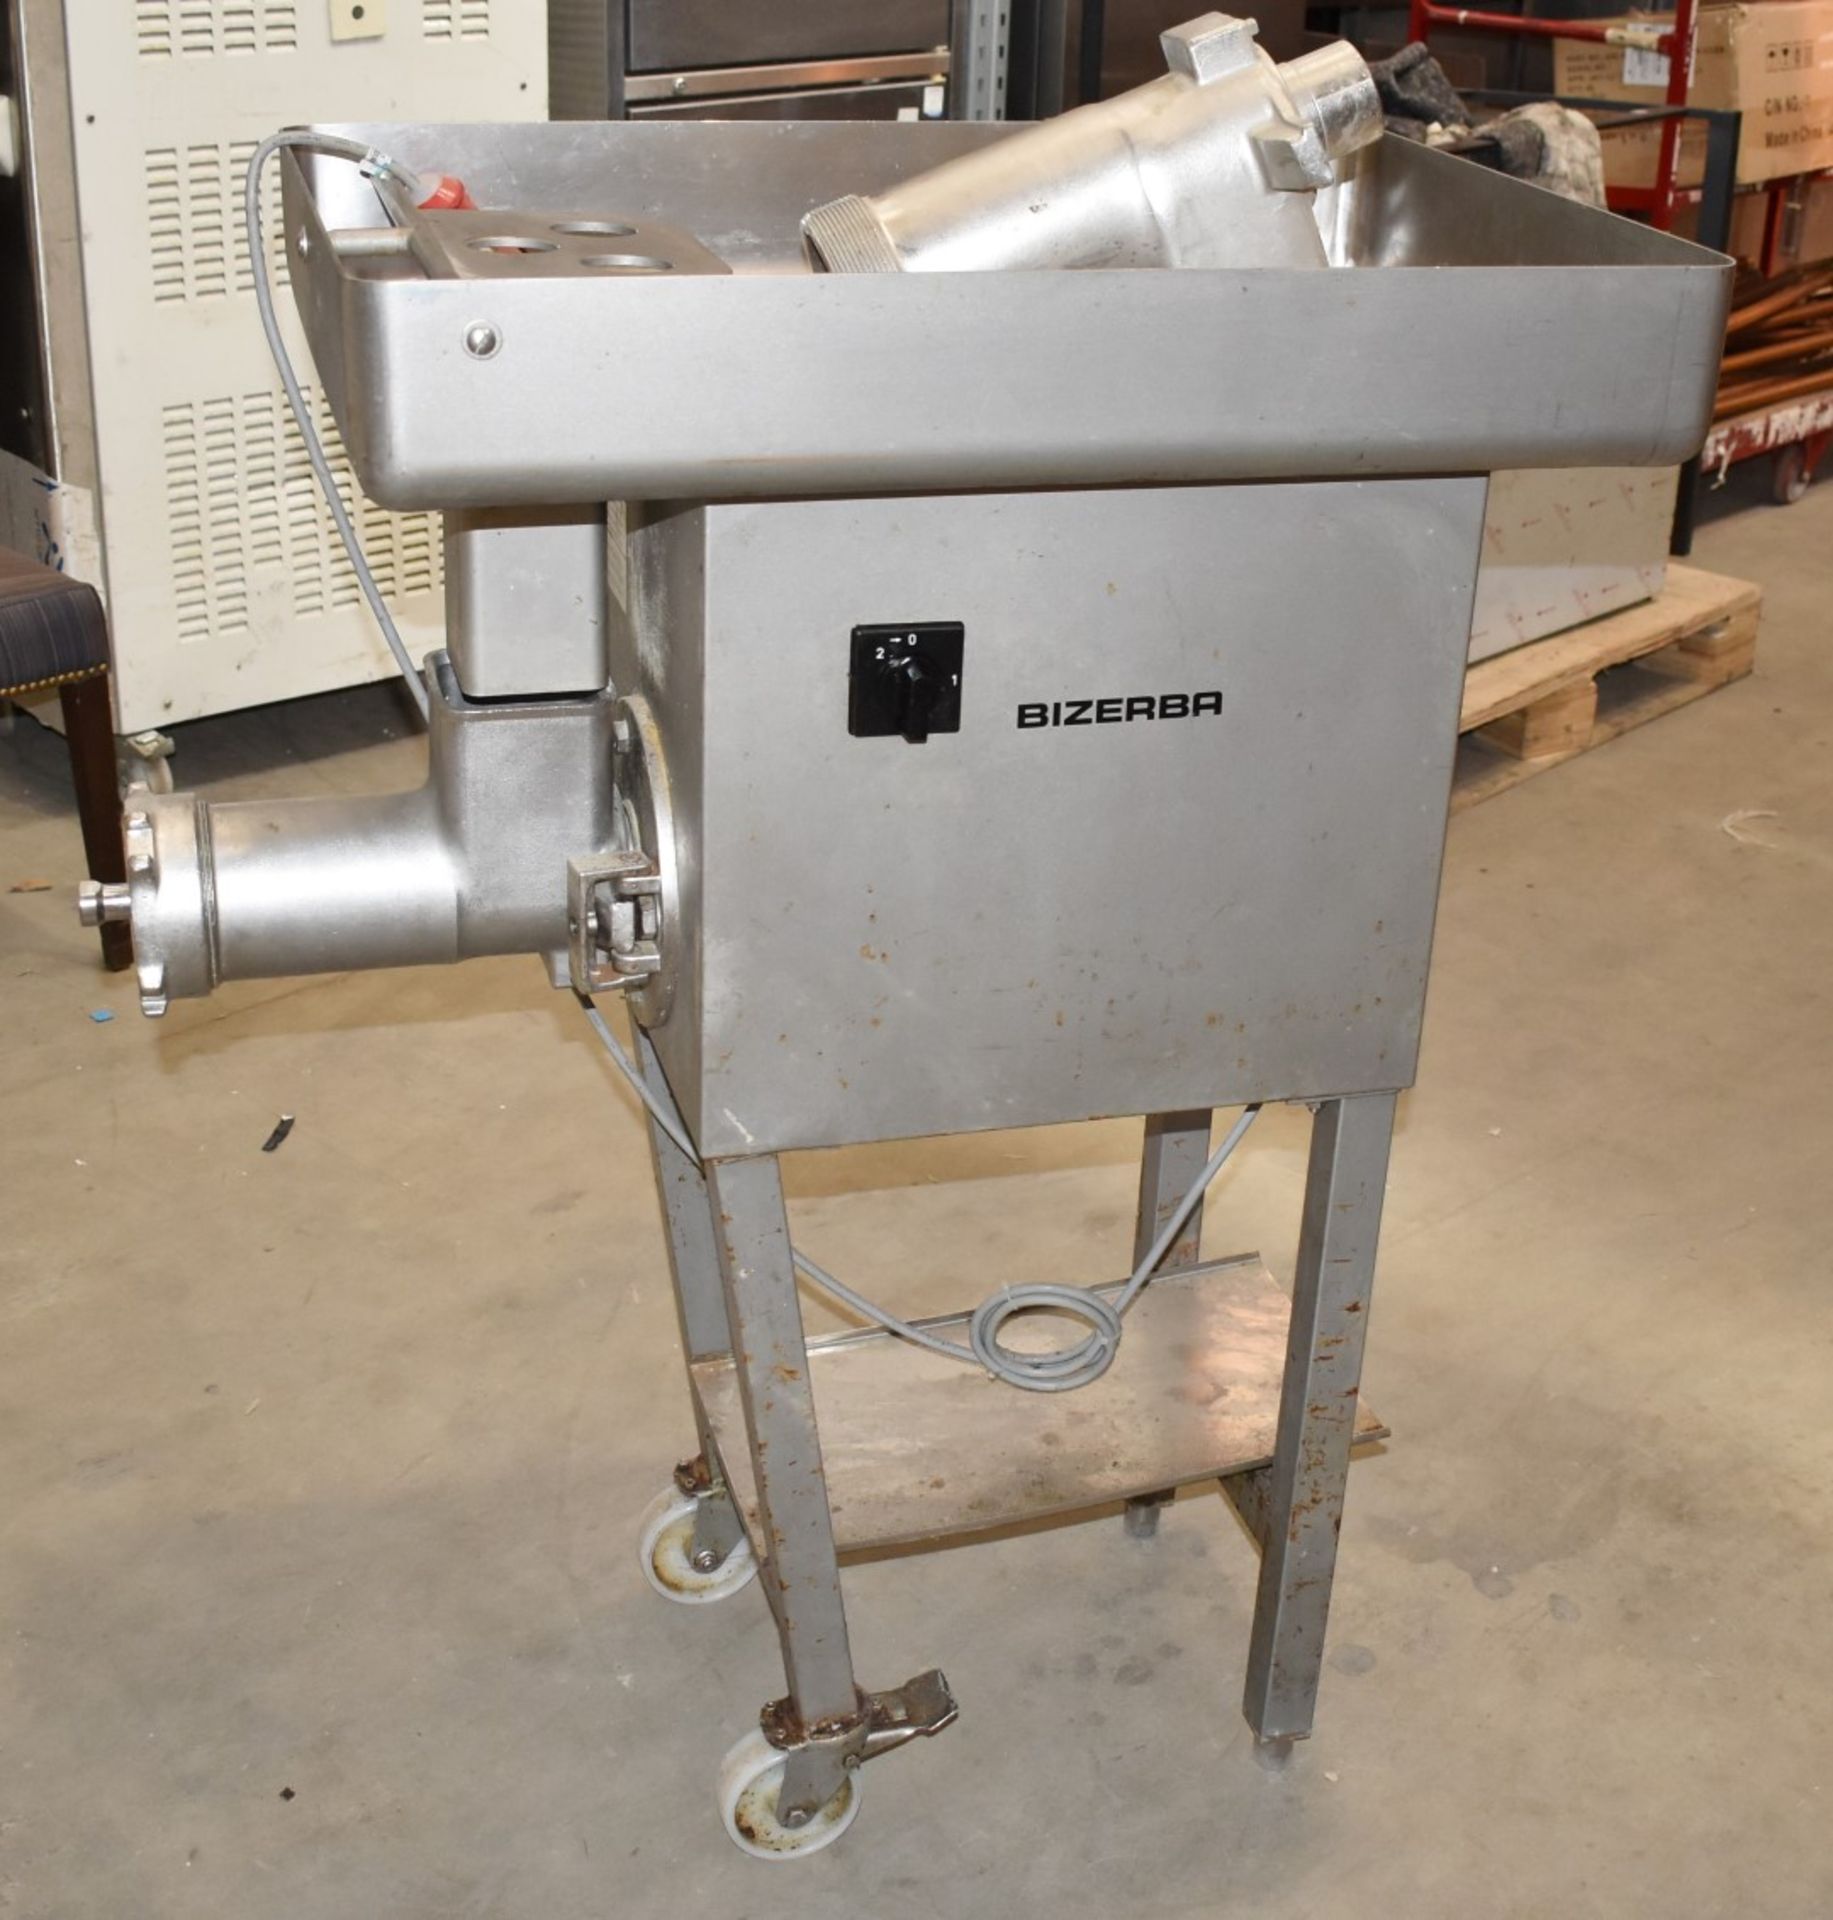 1 x Bizerba Meat Mincer - With Stand and Various Accessories - Model FW-N32S/2 - 3 Phase - Image 5 of 14